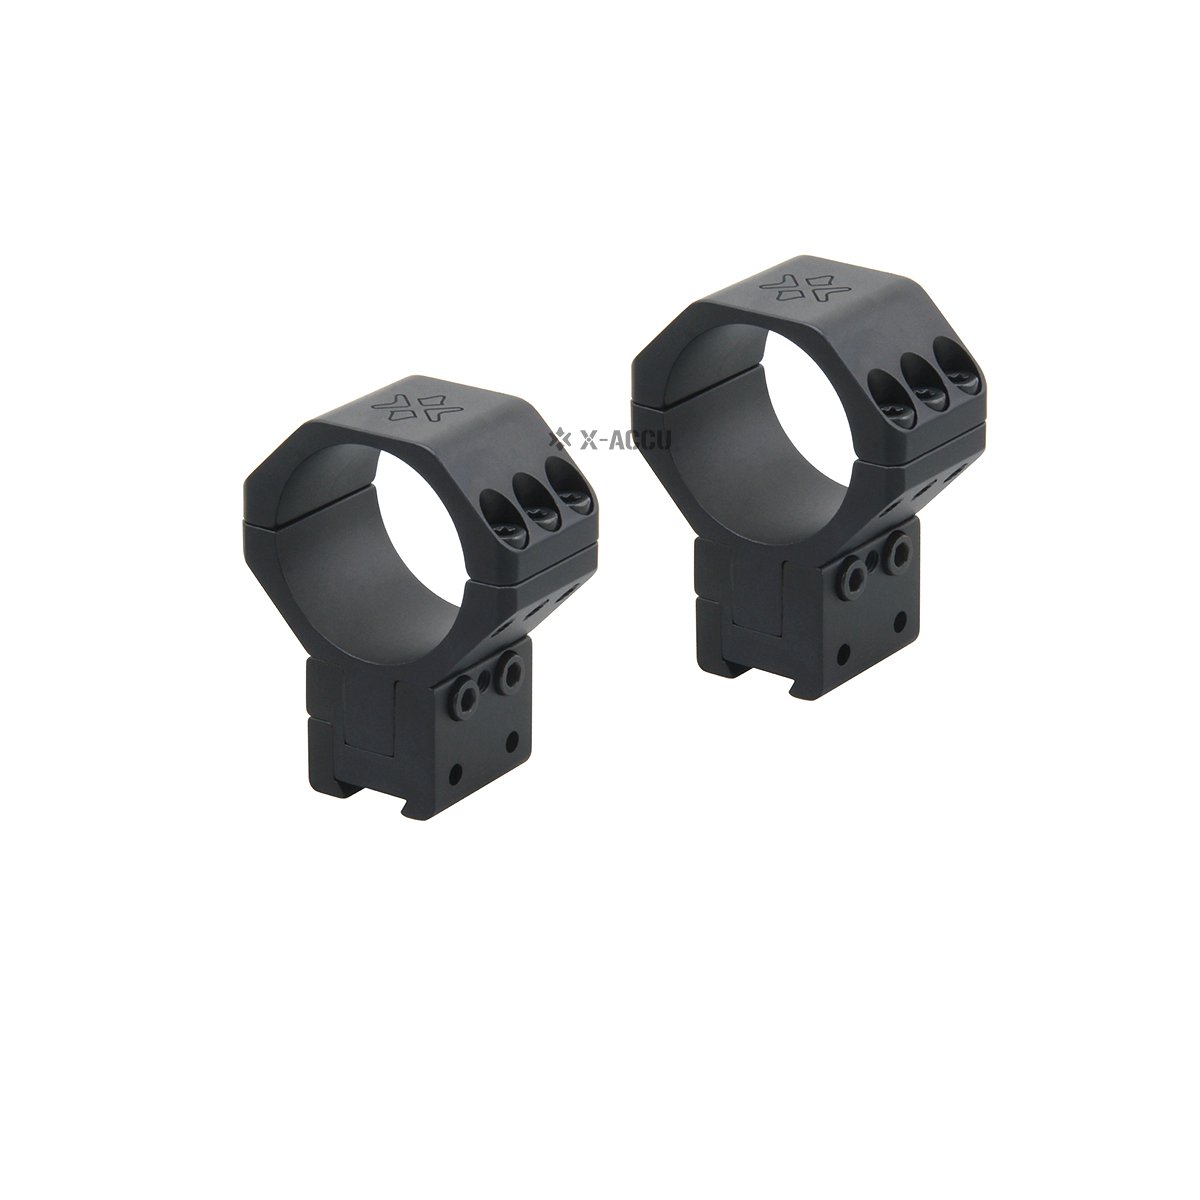 Get High Quality 6 Bolts X-ACCU Scopes Rings with the Lowest Price 